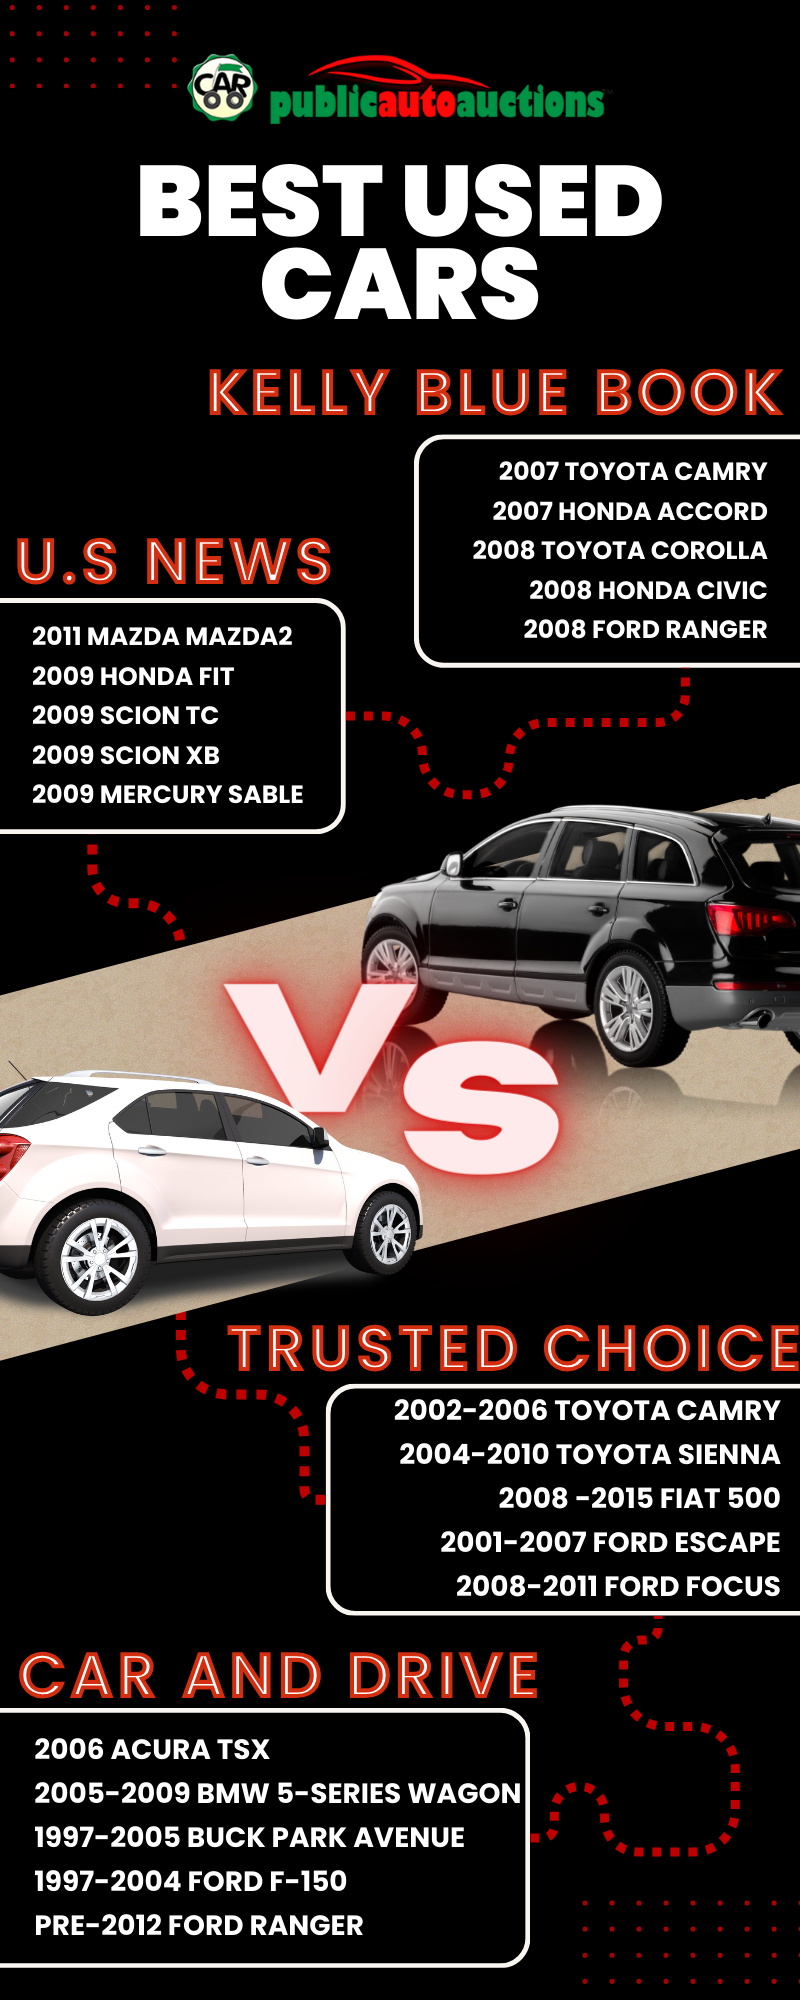 This infographic looks at the best used cars you can buy for under $5000 at an auction lot.